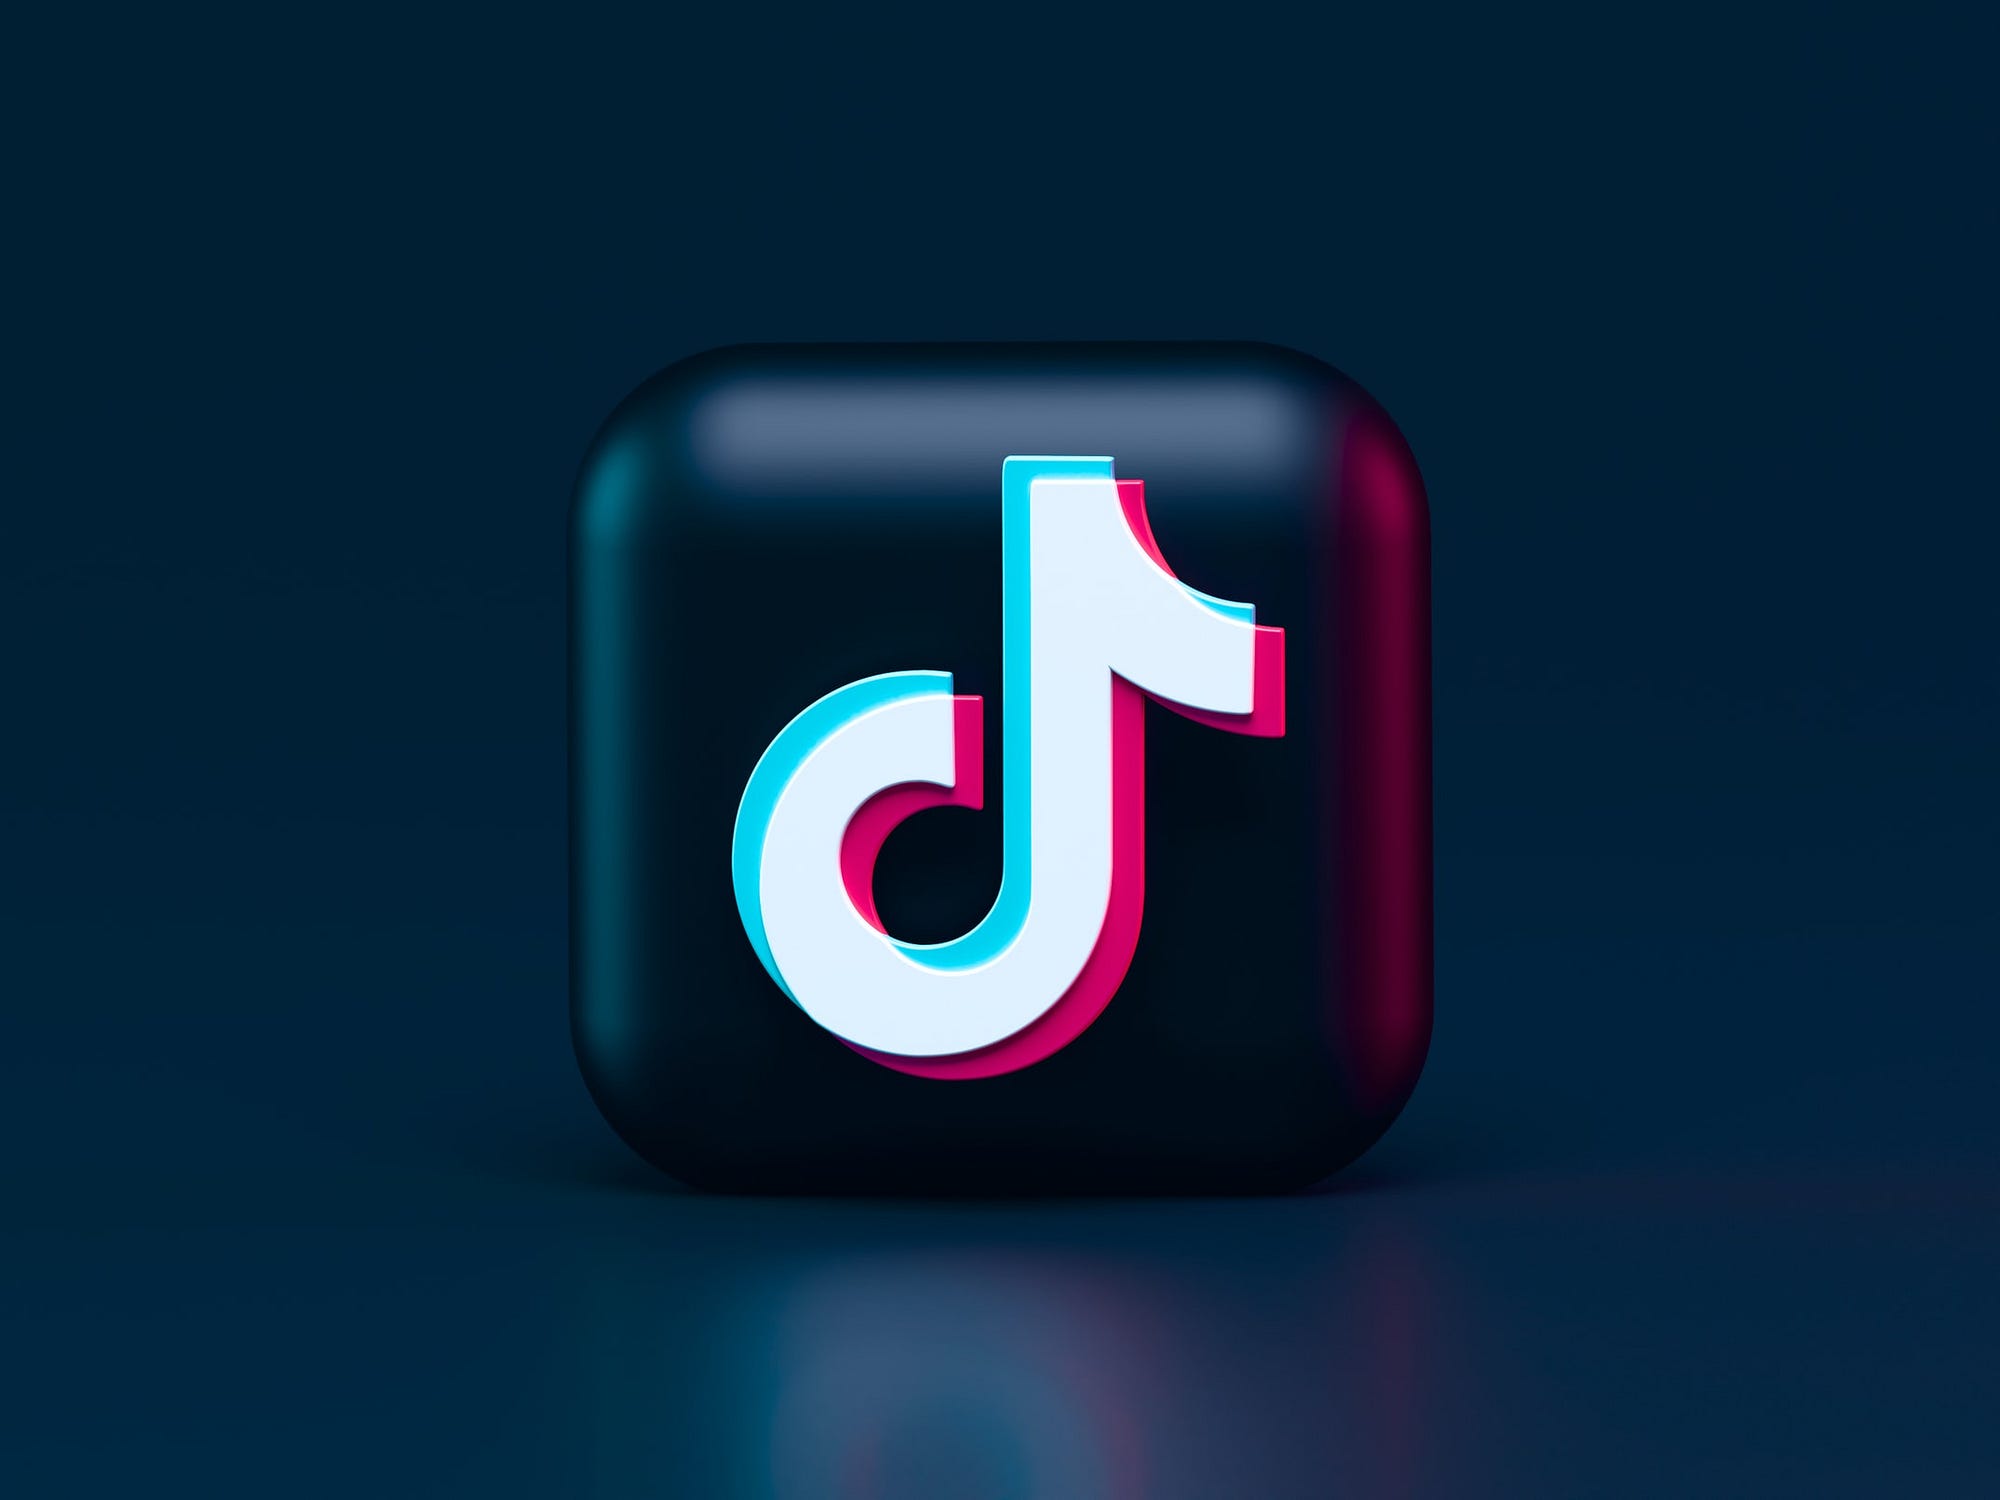 home can you come home speed up｜TikTok Search